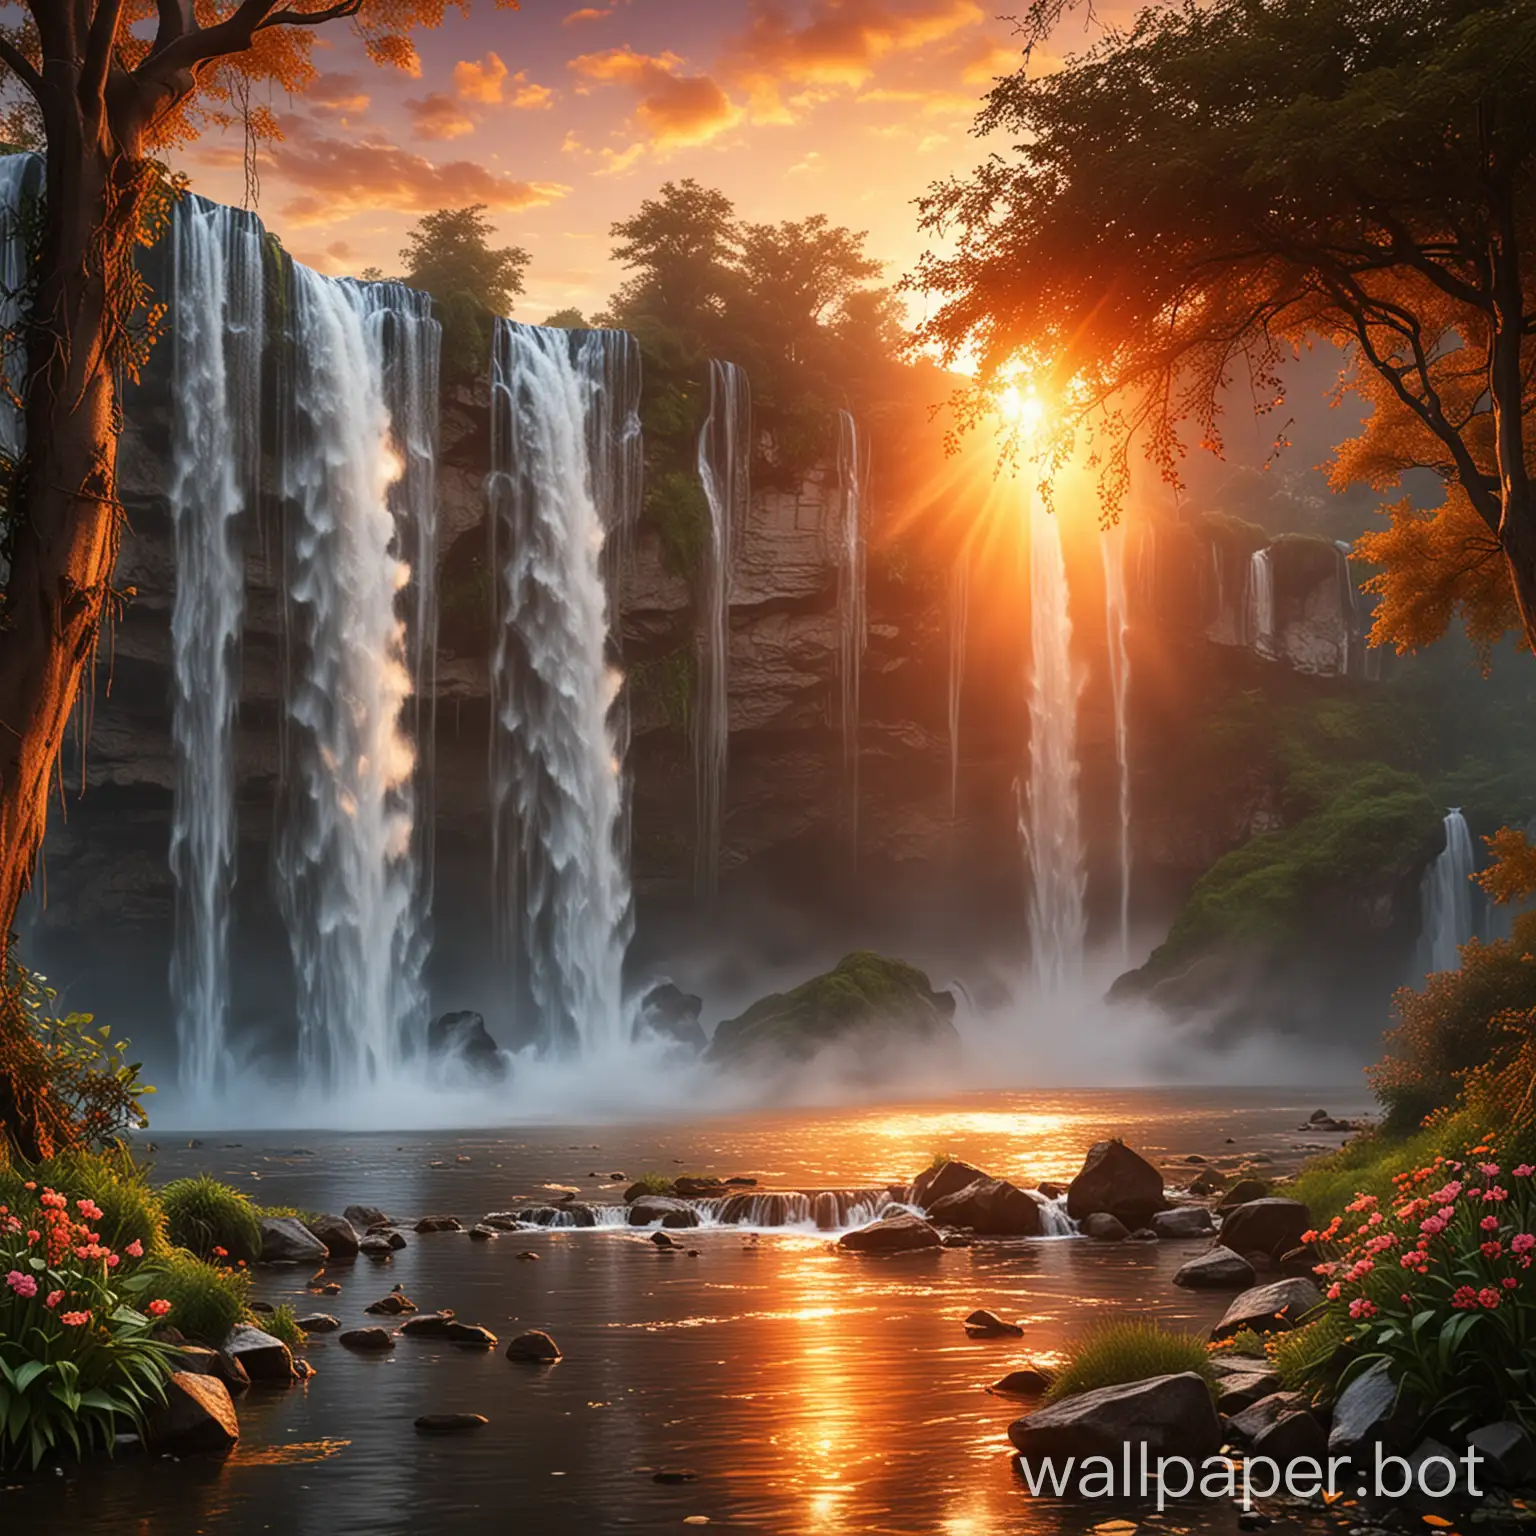 a symphony of forever-romantic scenery beautiful sunset and waterfall